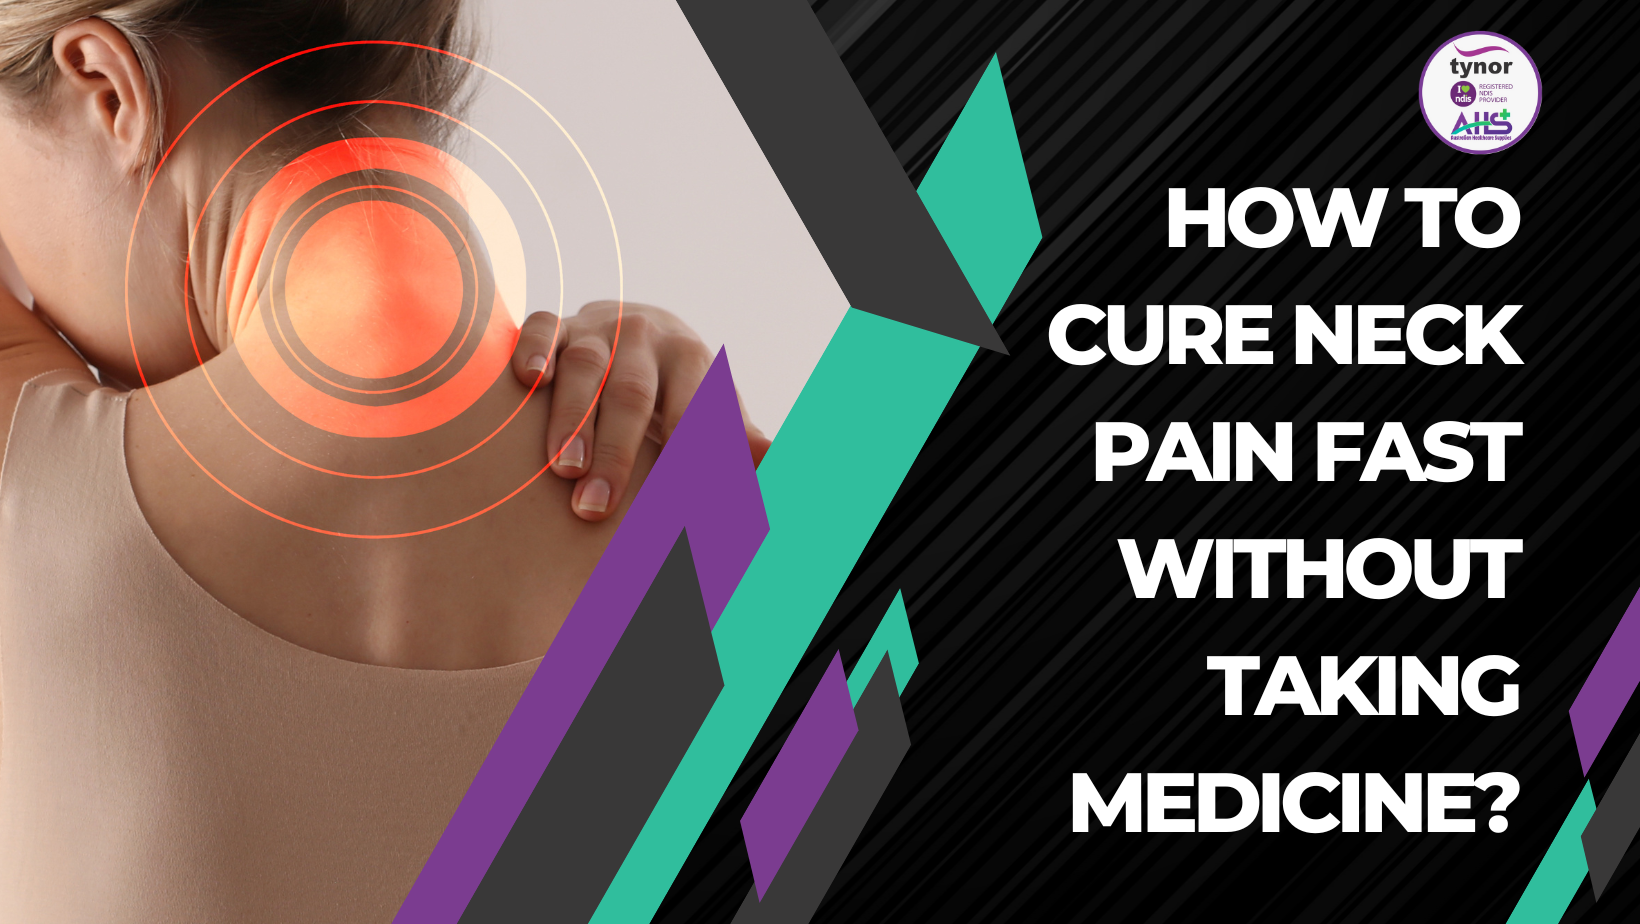 How To Cure Neck Pain Fast Without Taking Medicine?